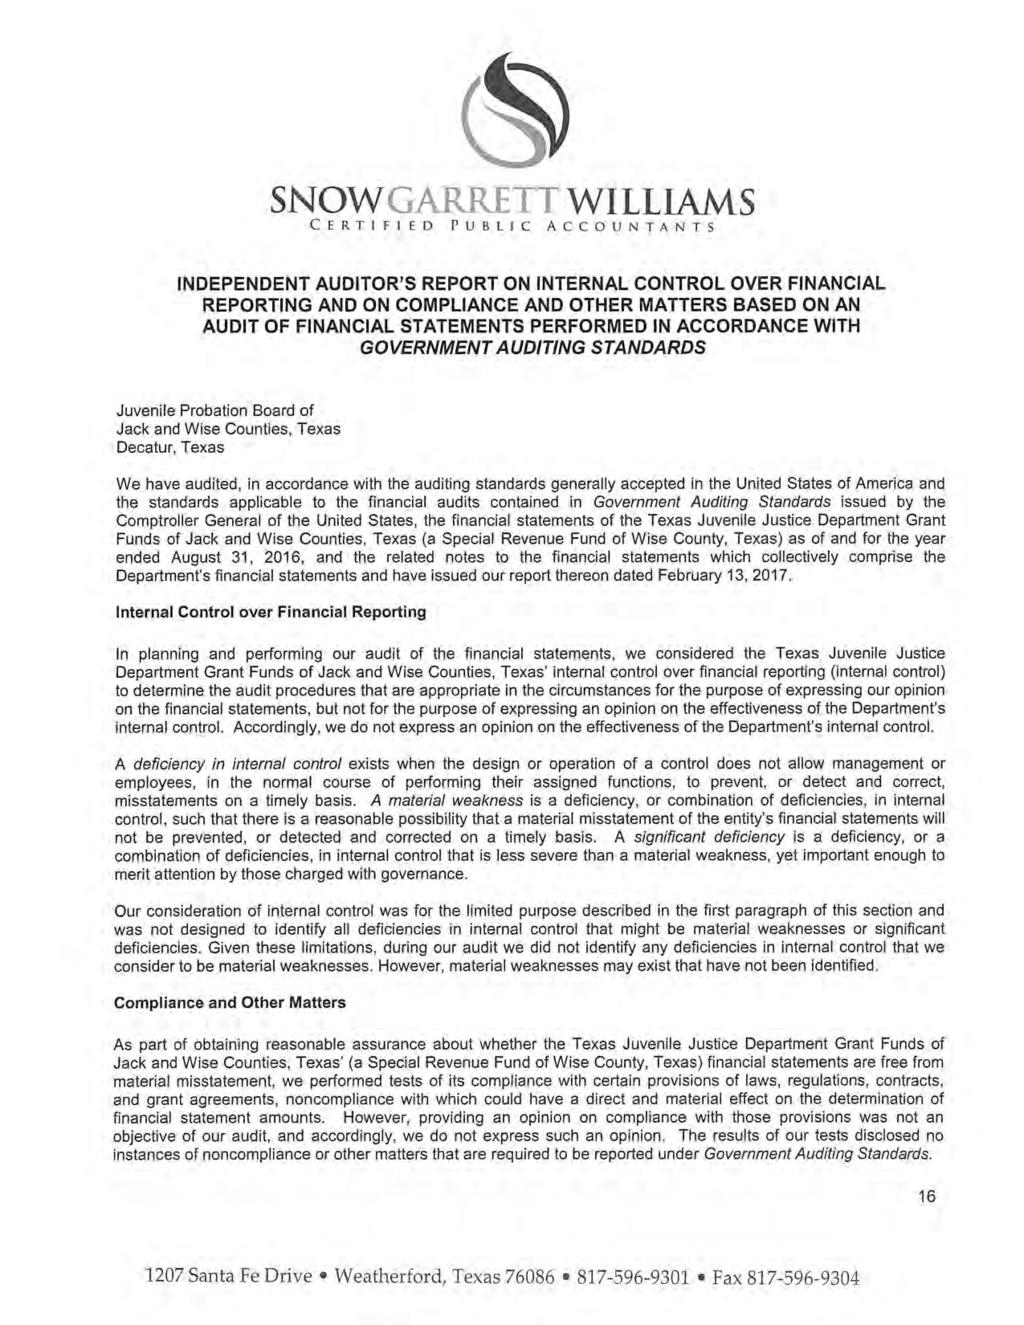 SNOW GARRETT WILLIAMS CERTIFIED PUBLIC ACCOUNTANTS INDEPENDENT AUDITOR'S REPORT ON INTERNAL CONTROL OVER FINANCIAL REPORTING AND ON COMPLIANCE AND OTHER MATTERS BASED ON AN AUDIT OF FINANCIAL